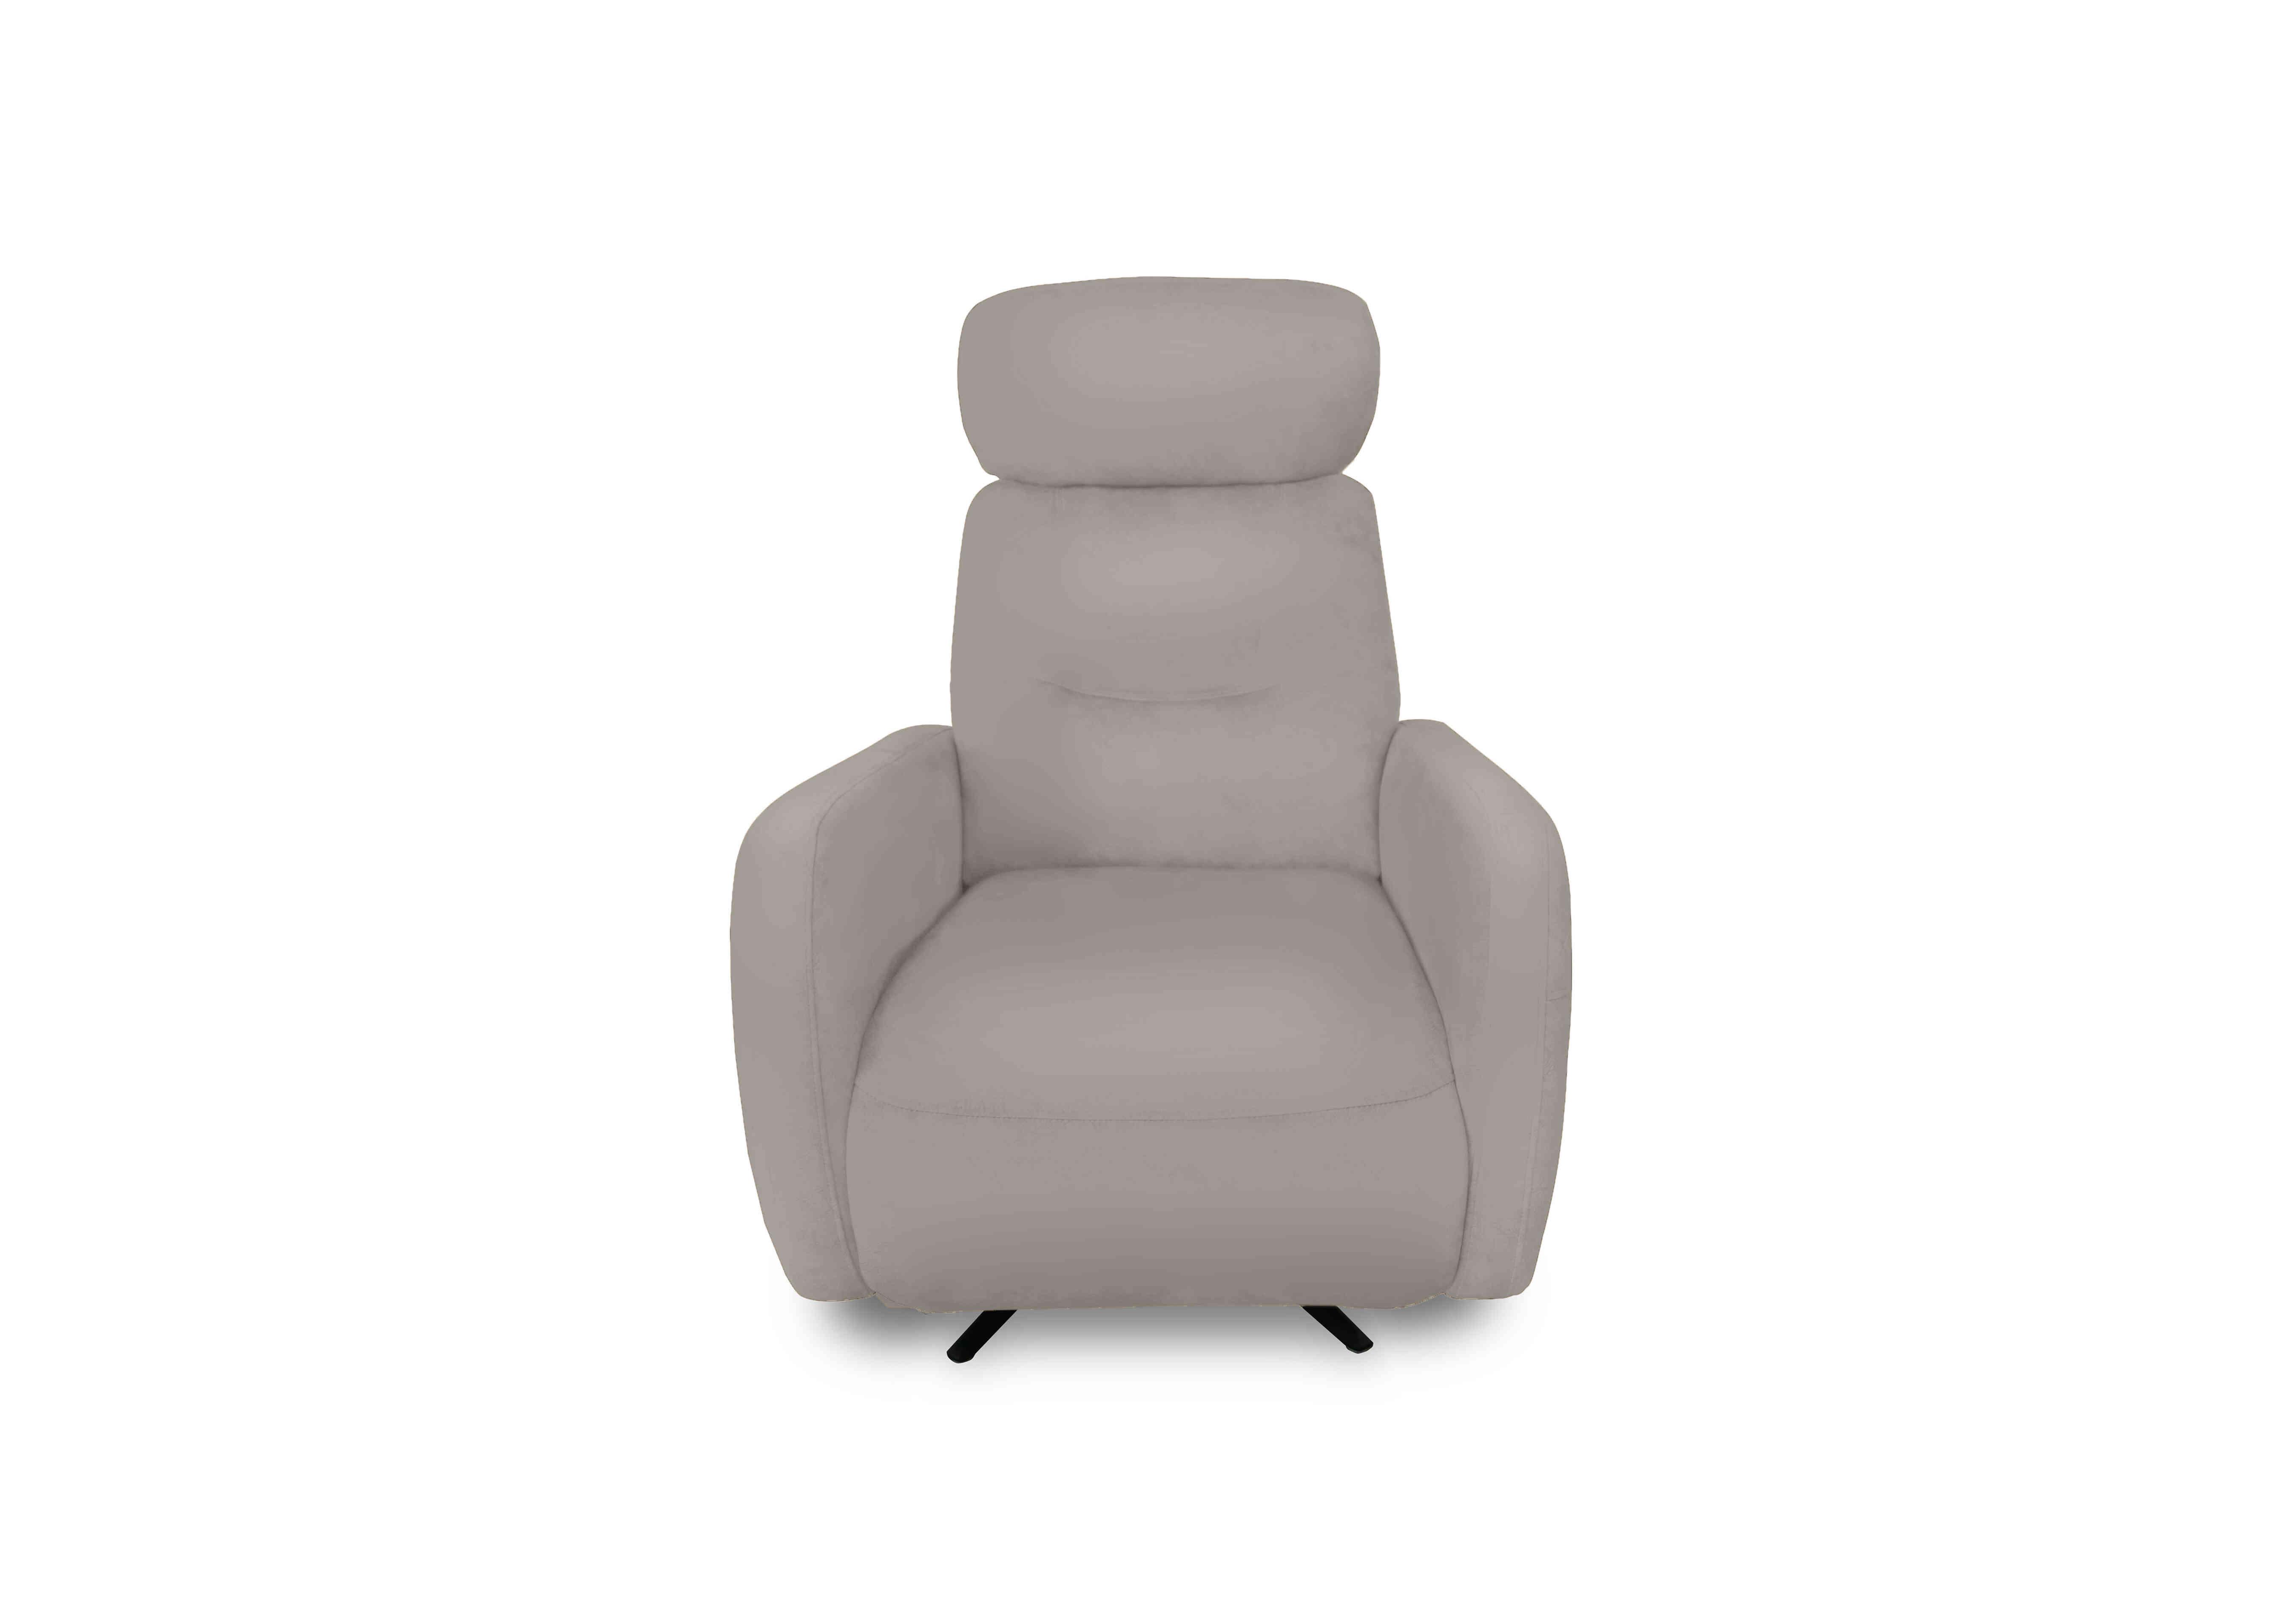 Designer Chair Collection Tokyo Leather Manual Recliner Swivel Chair in Bv-946b Silver Grey on Furniture Village